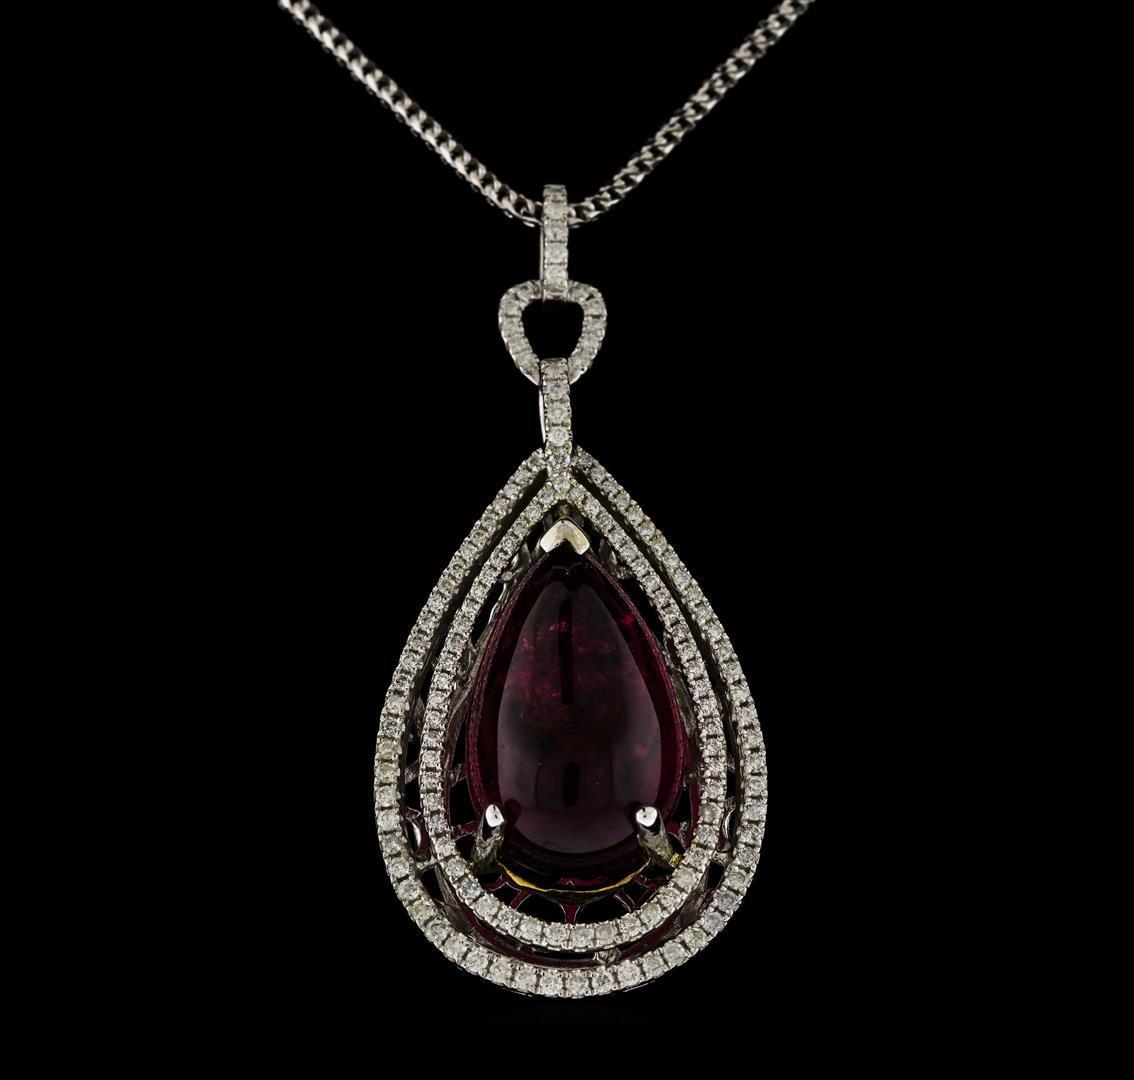 12.33 ctw Tourmaline and Diamond Pendant With Chain - 14KT White Gold